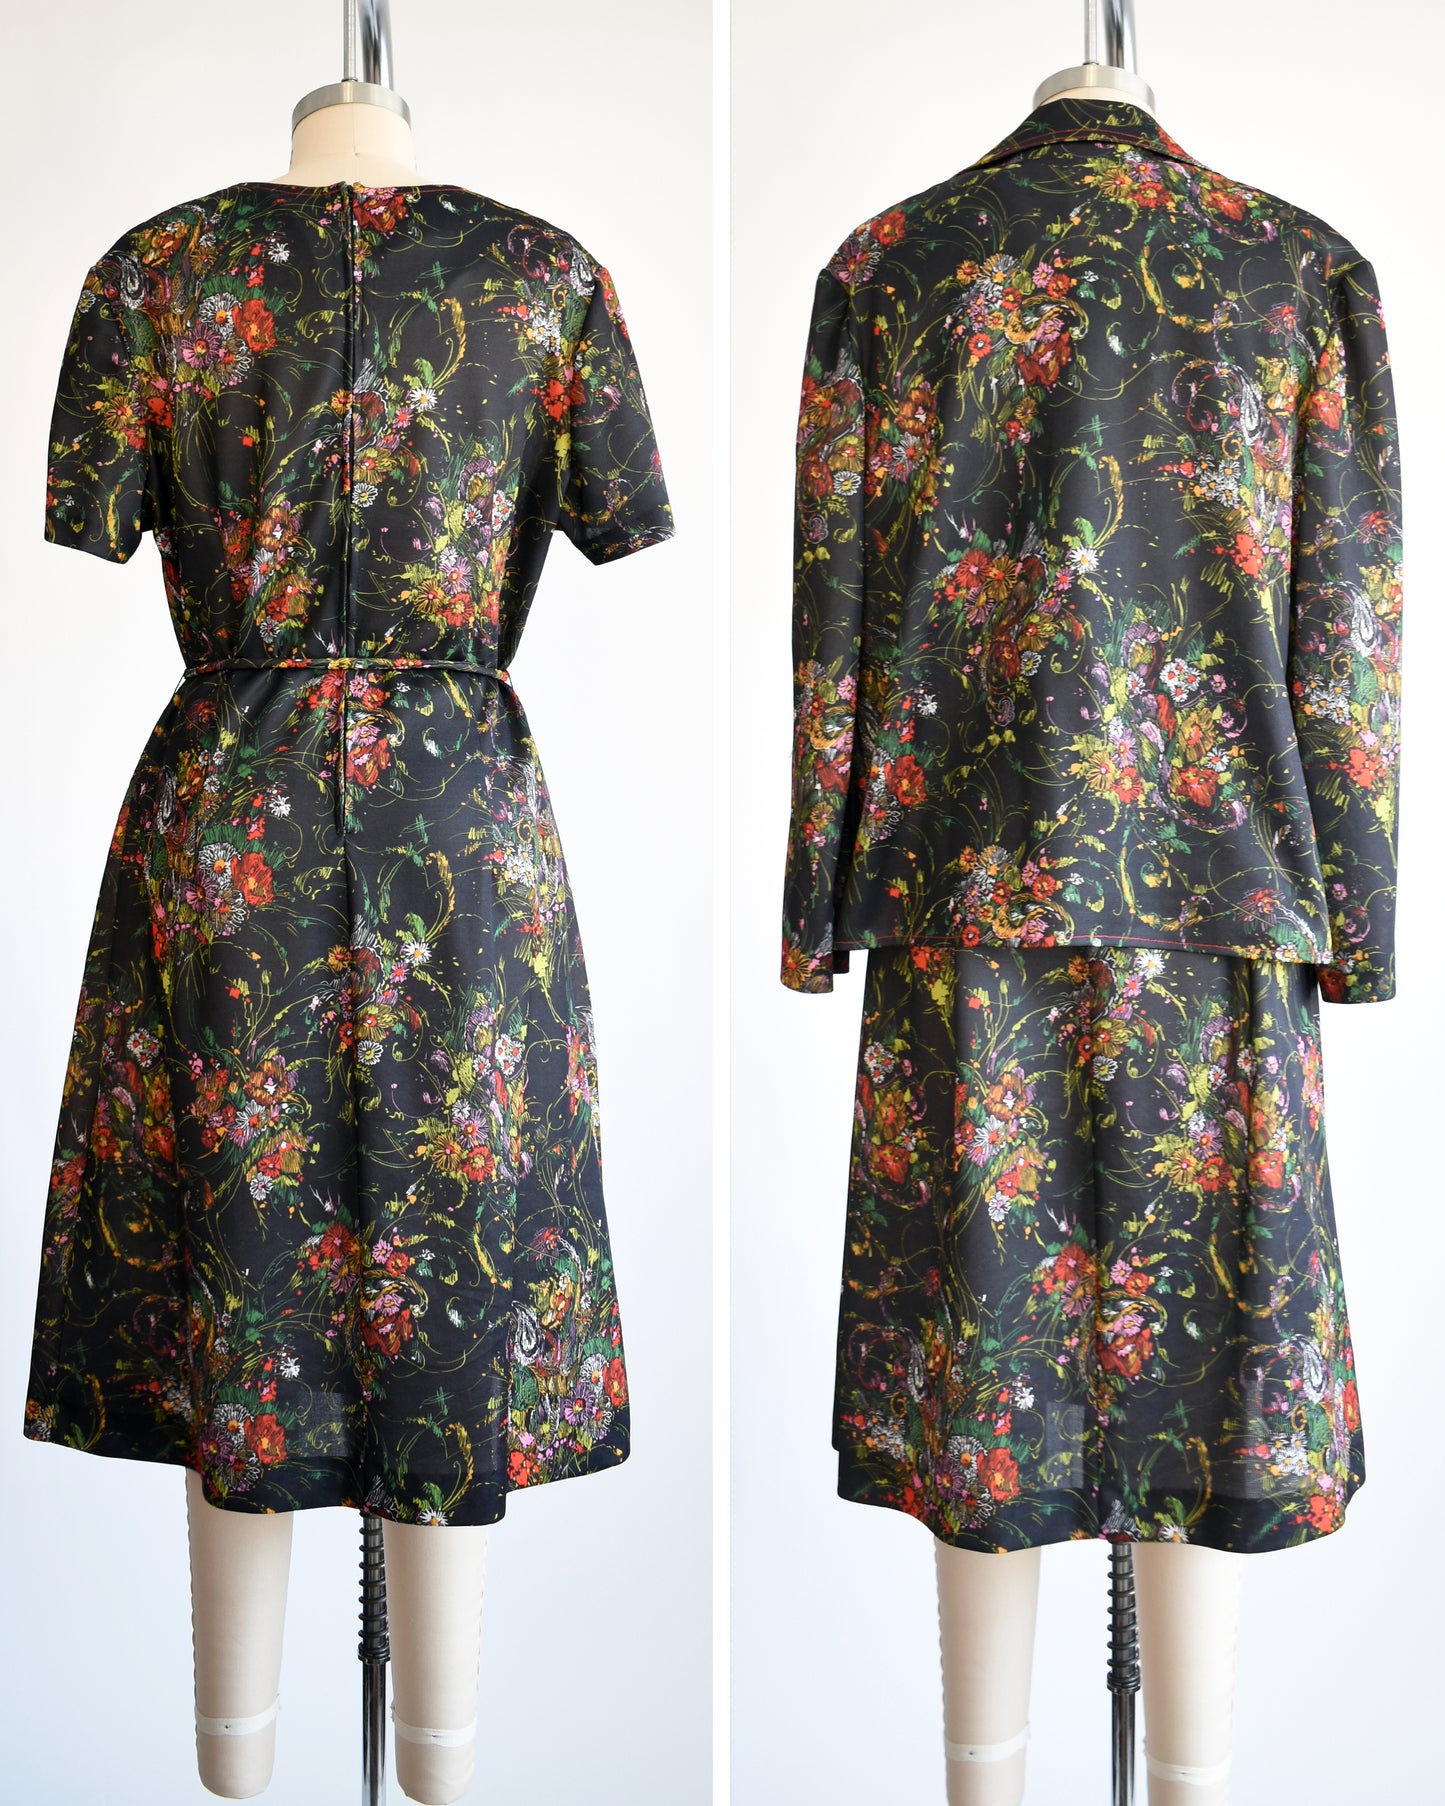 back views of a vintage 1970s black floral dress set that comes with a dress, a matching top, and belt